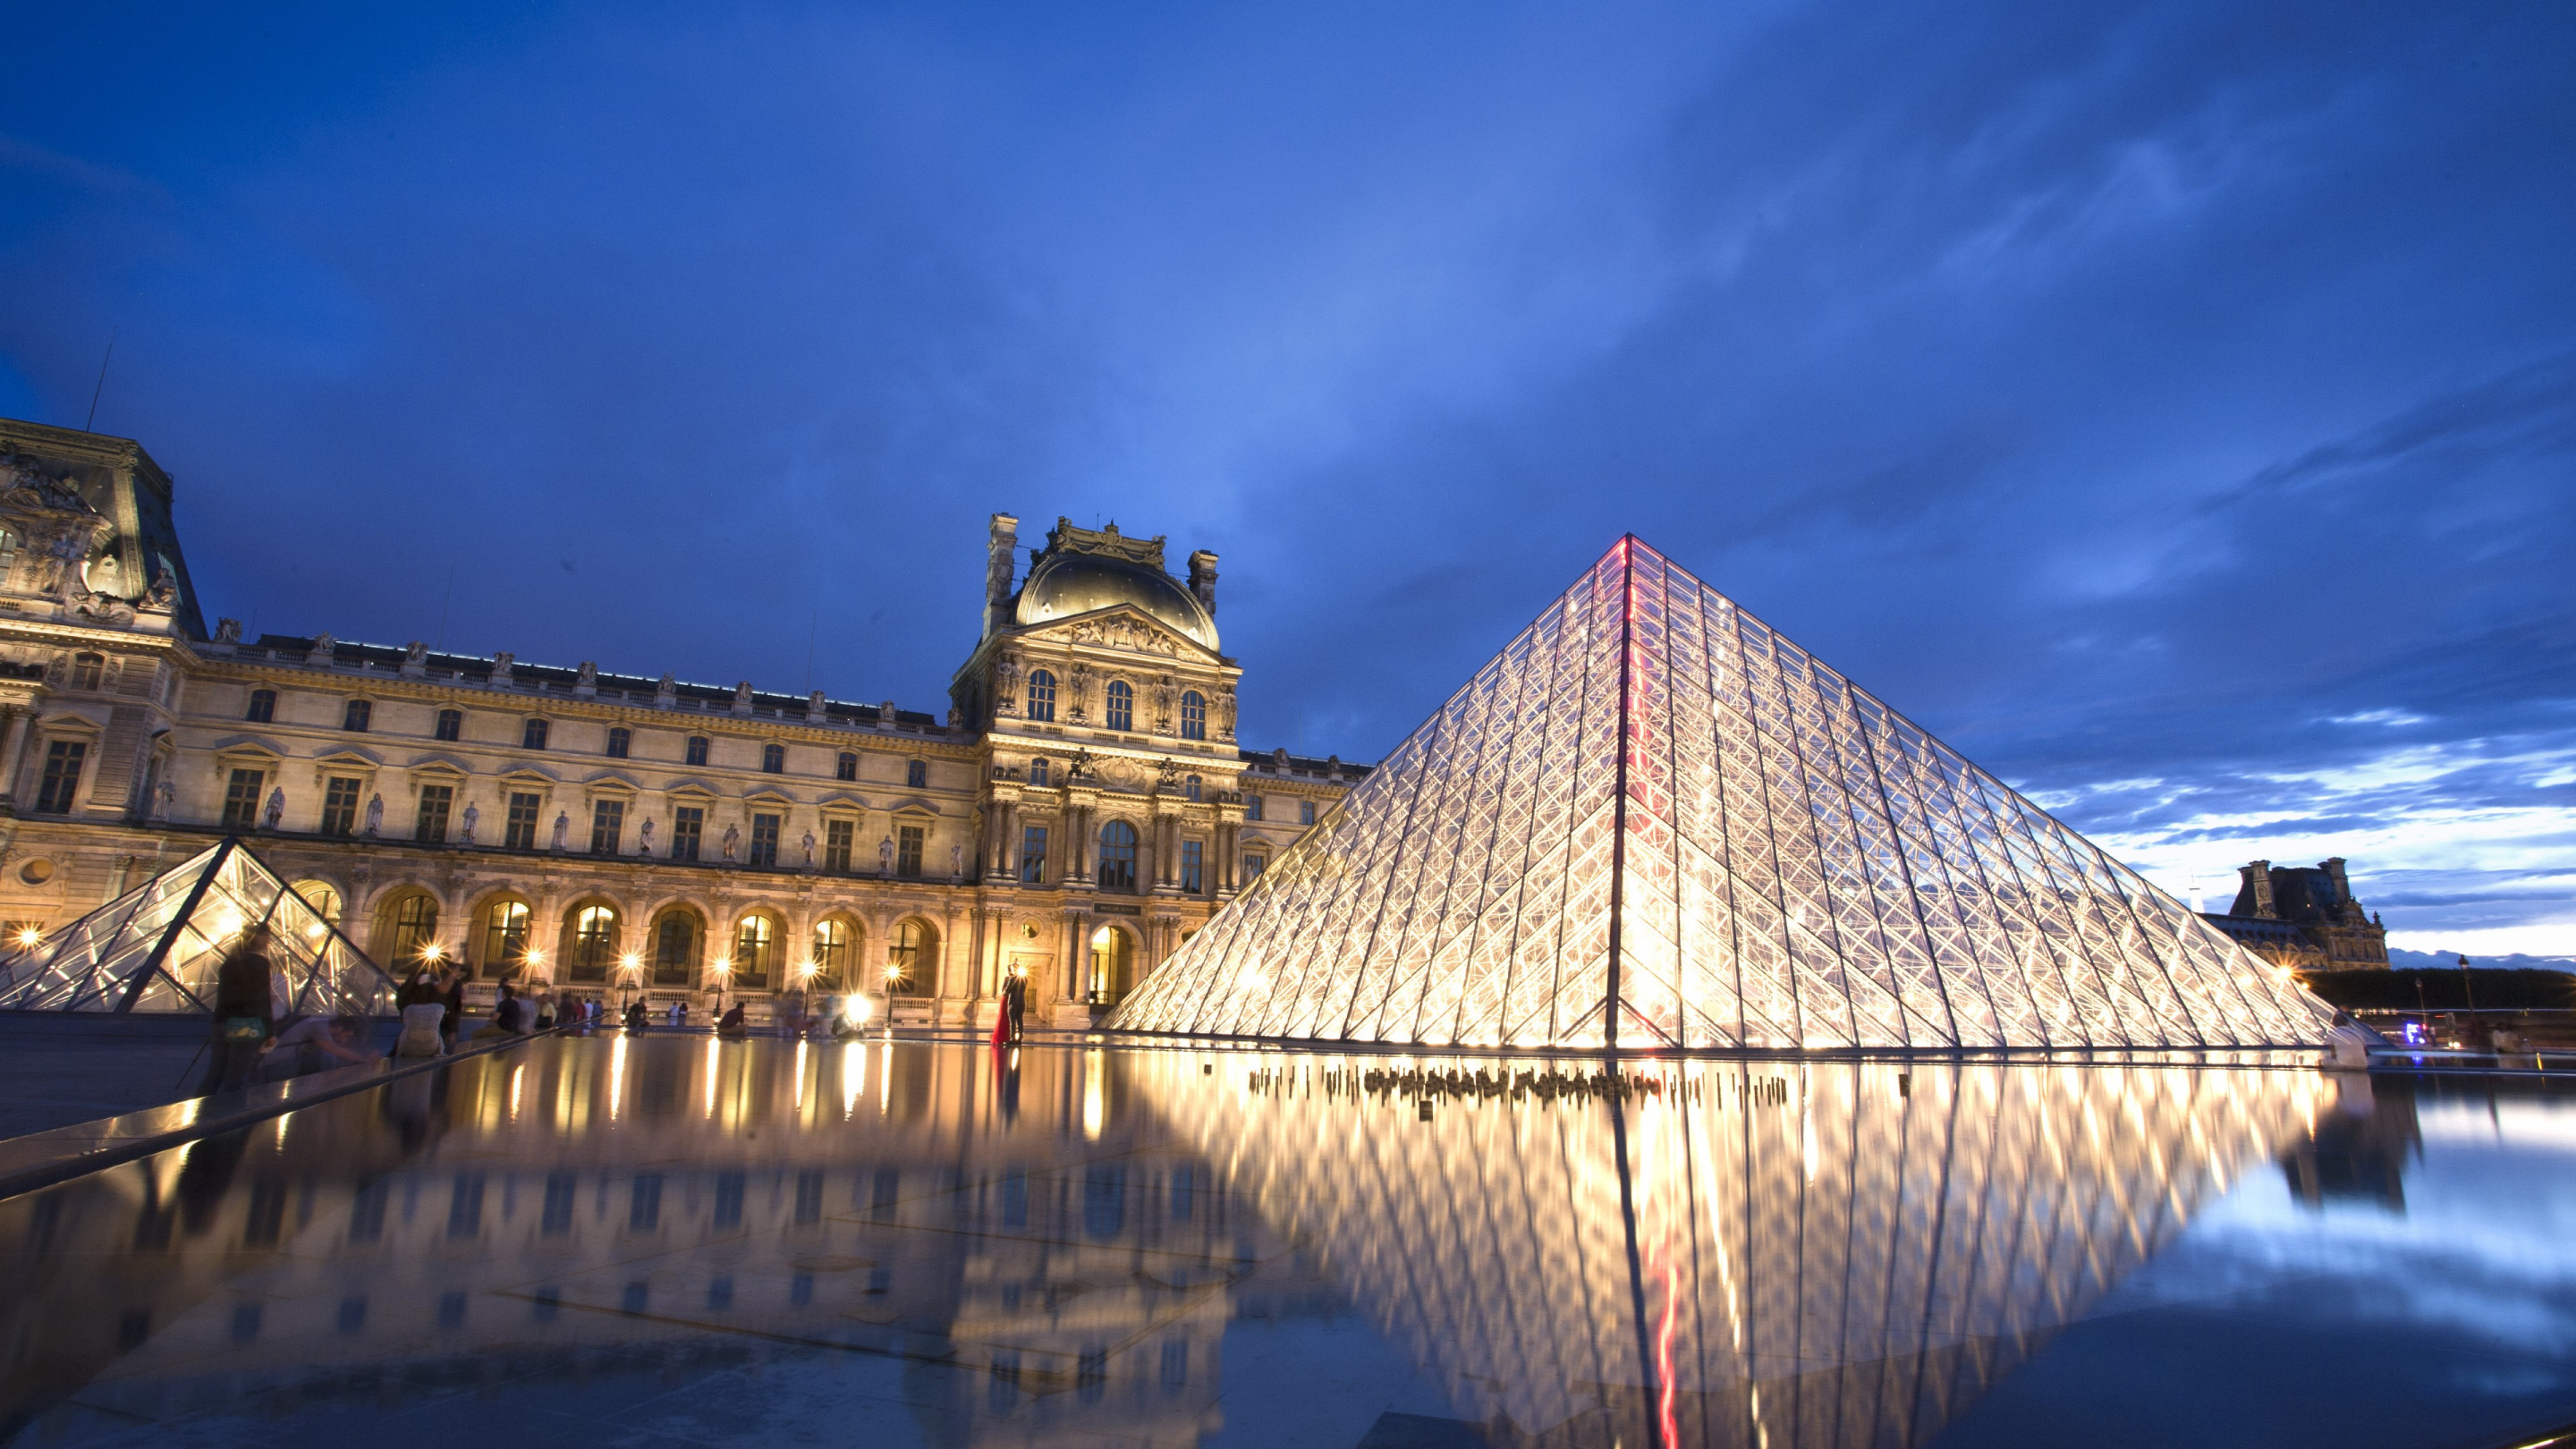 Louvre pyramid and museum wallpaper 2880x1620